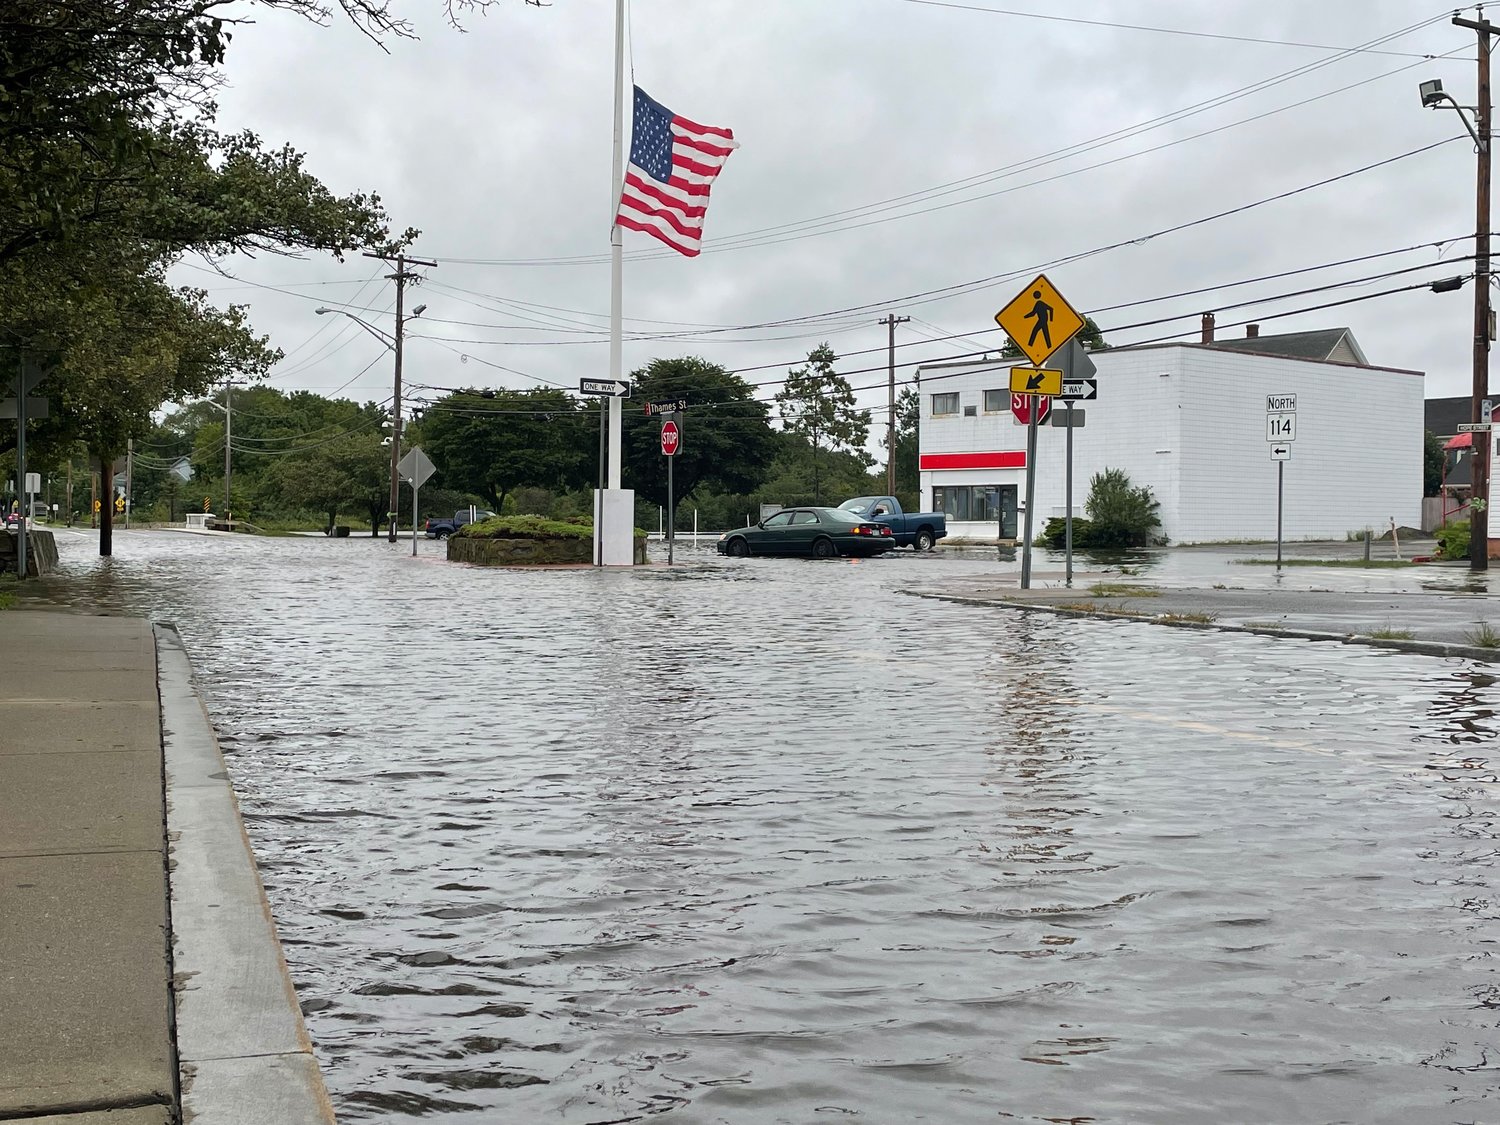 The intersection of Hope and Washington Streets under several inches of water on Thursday morning.